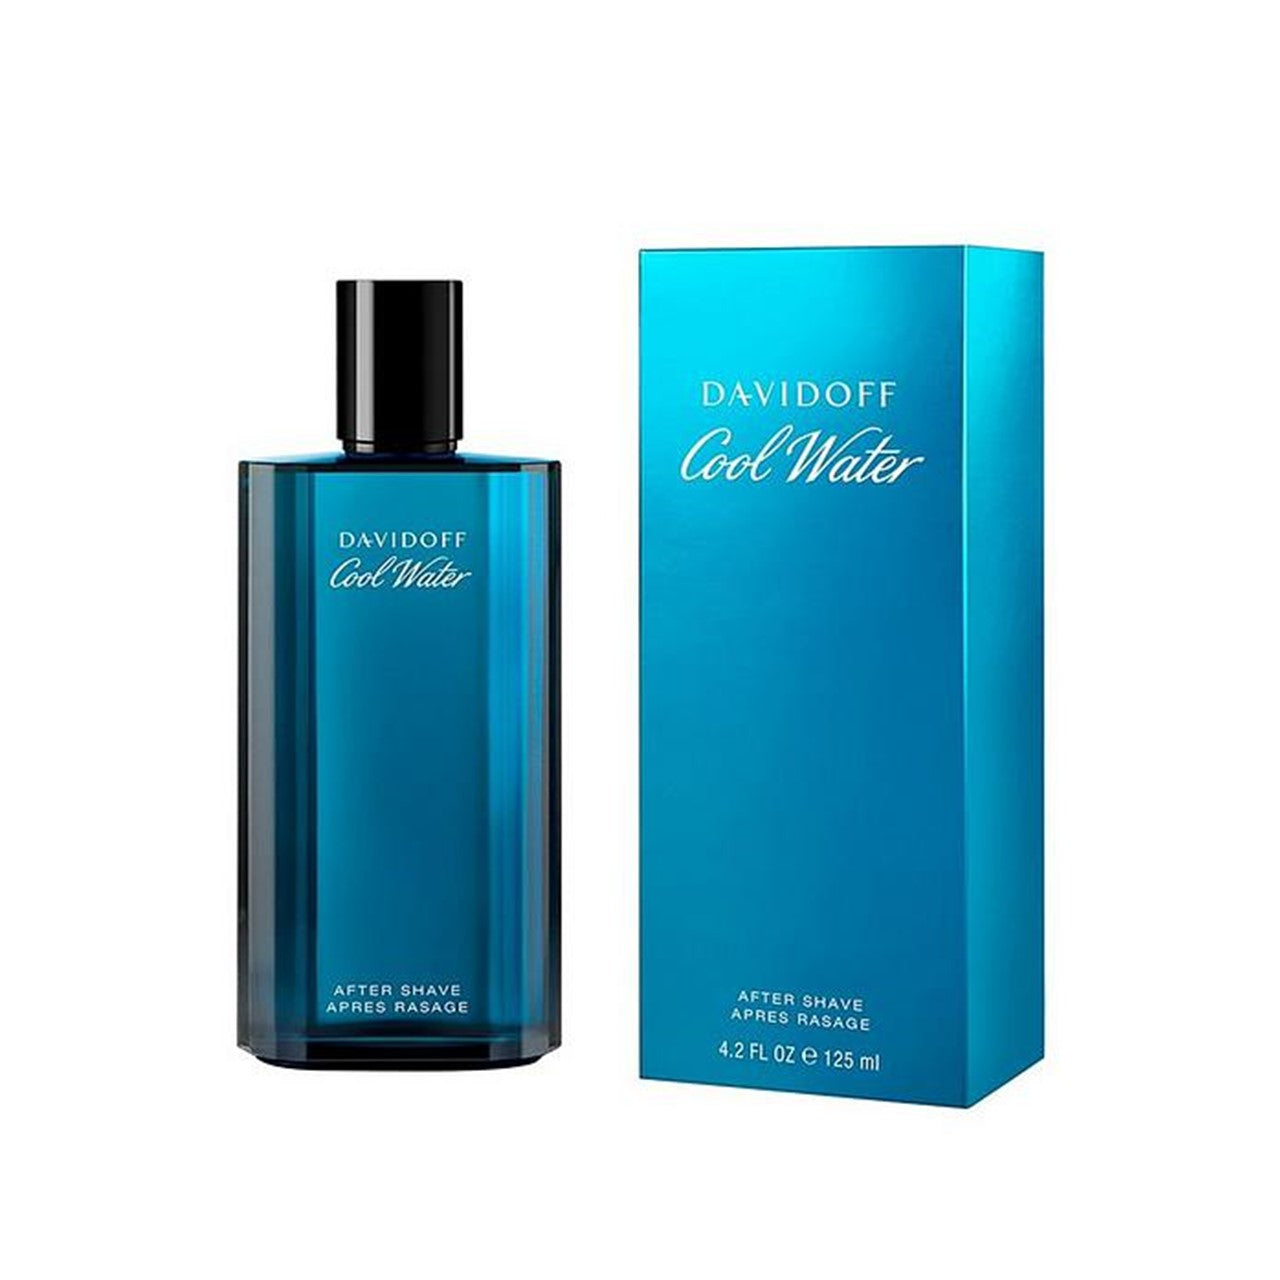 DAVIDOFF COOL WATER For Men 125ML AFTER SHAVE